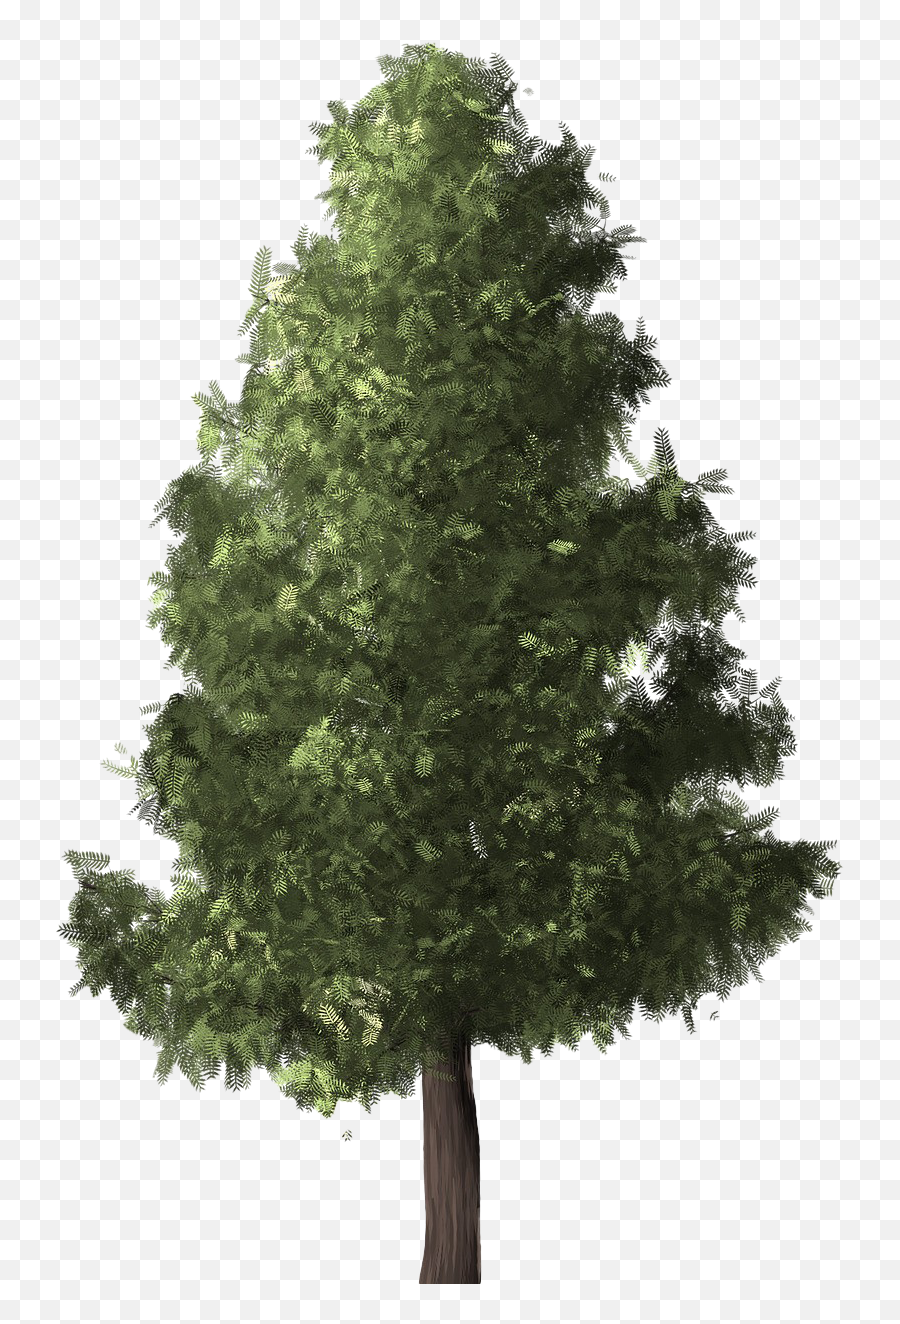 Evergreen Png Transparent Image - Evergreen Png,Evergreen Png